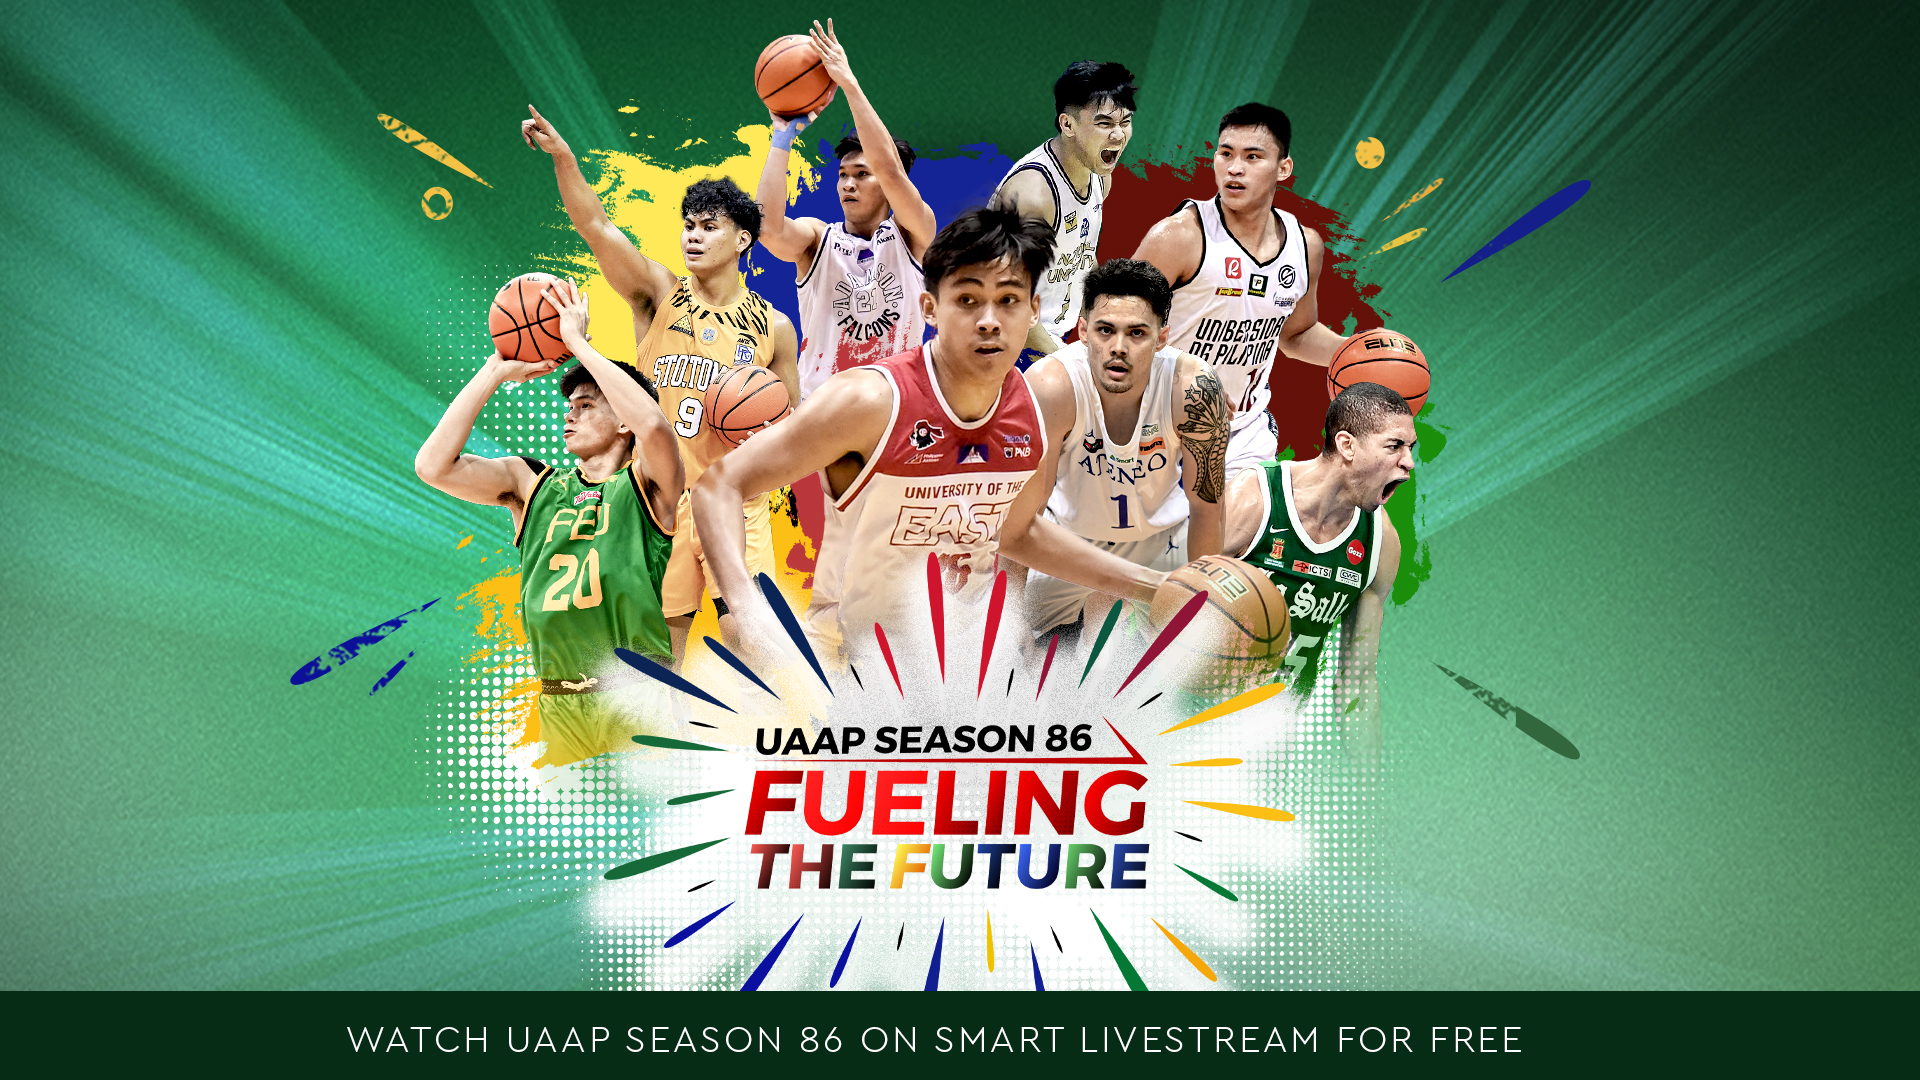 Watch UAAP Season 86 For Free On This Livestream App